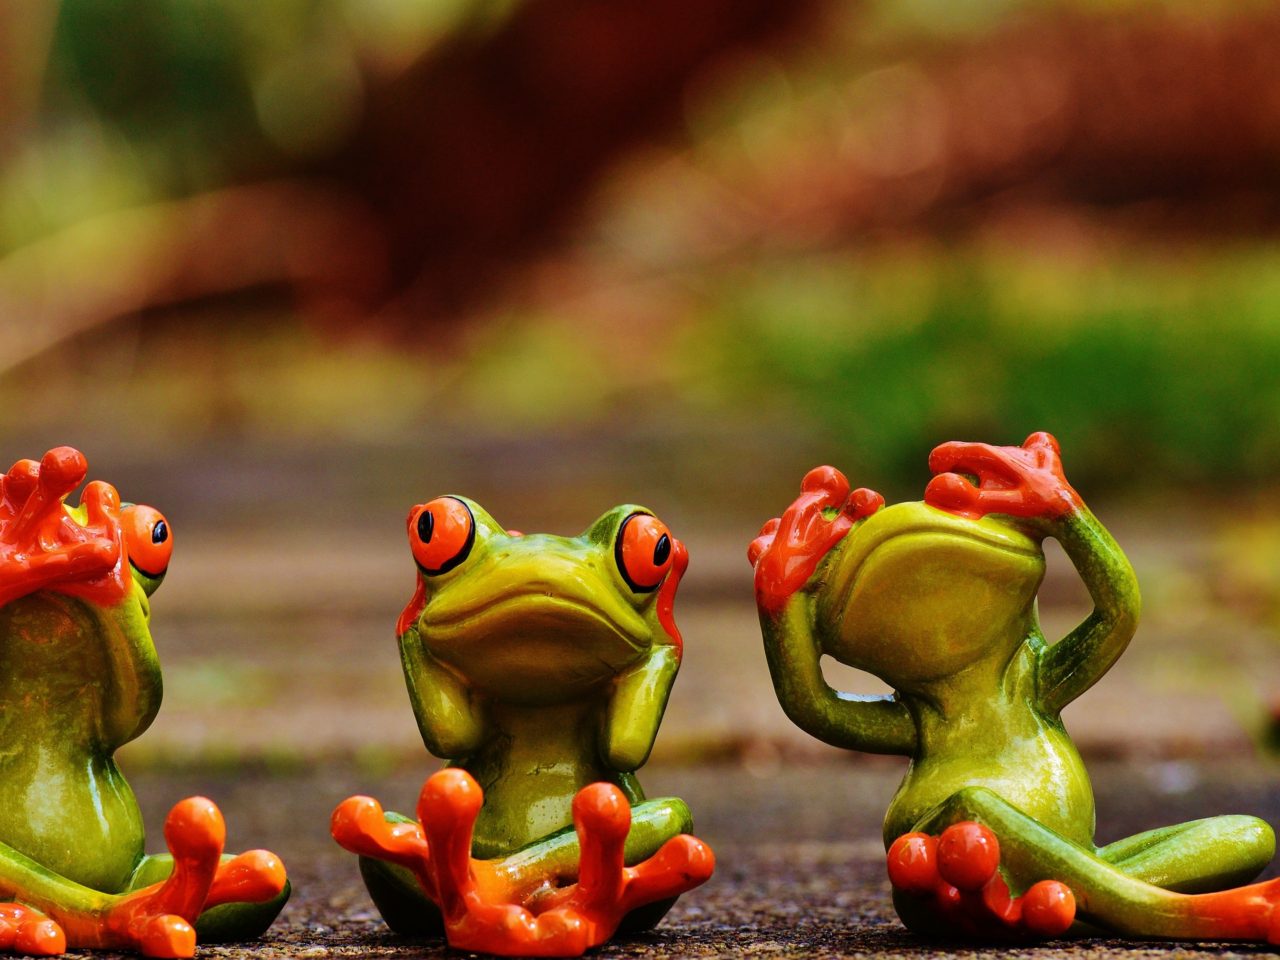 Cute Green Frogs With Red Eyes 3 D Wallpaper HD 3840x2160, Wallpaper13.com